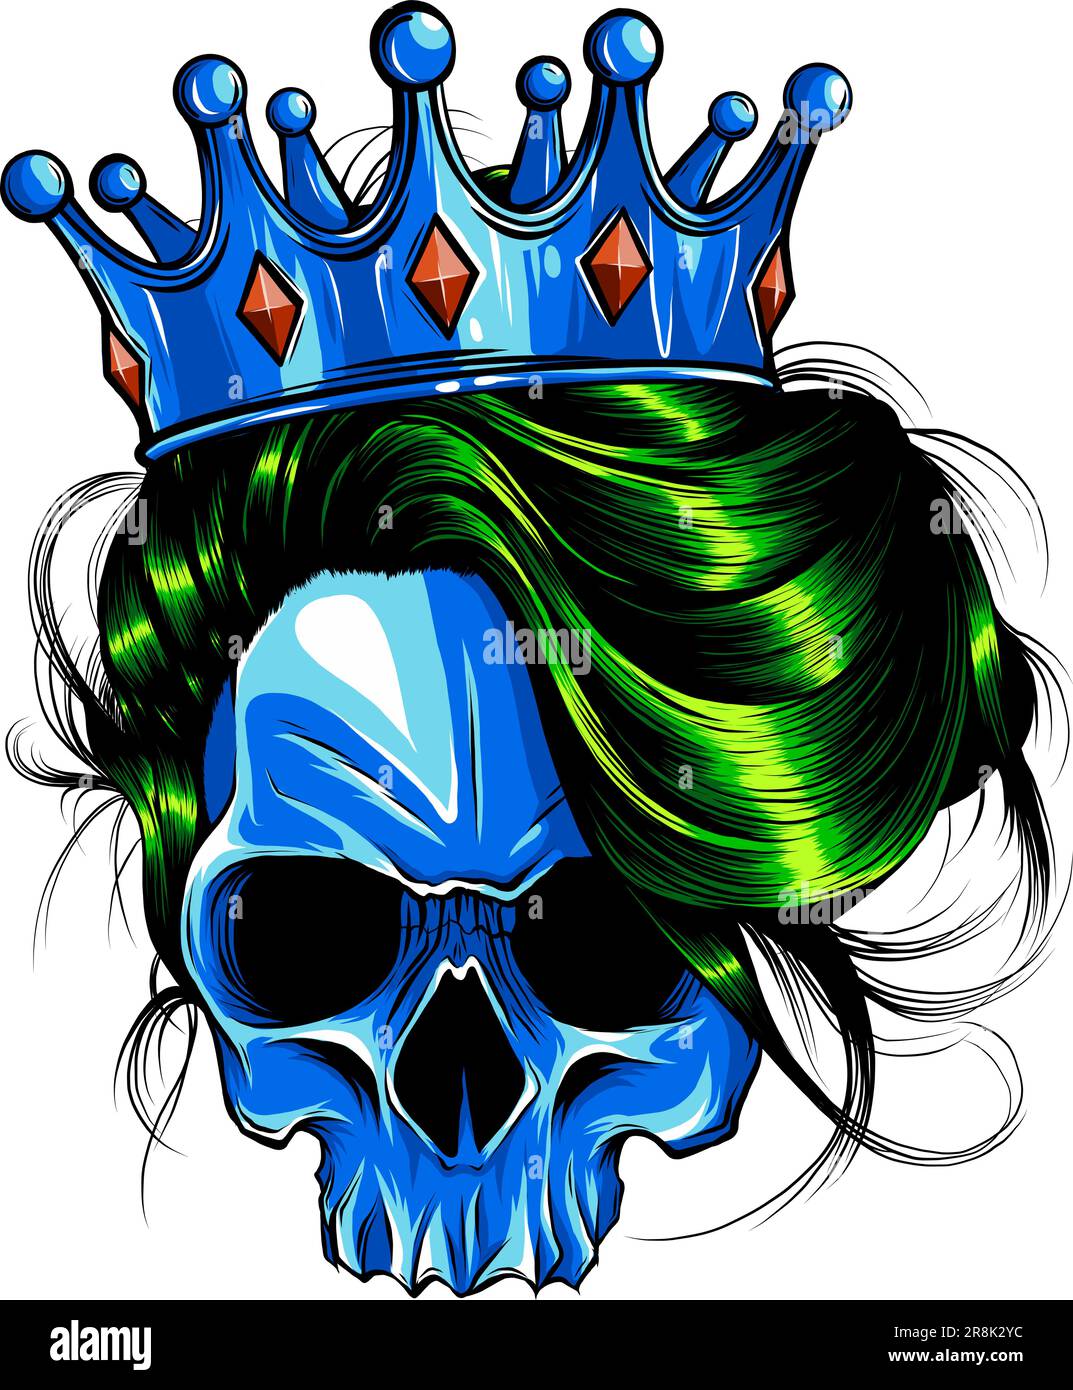 Queen of death. Portrait of a skull with a crown and long hair. Stock Vector